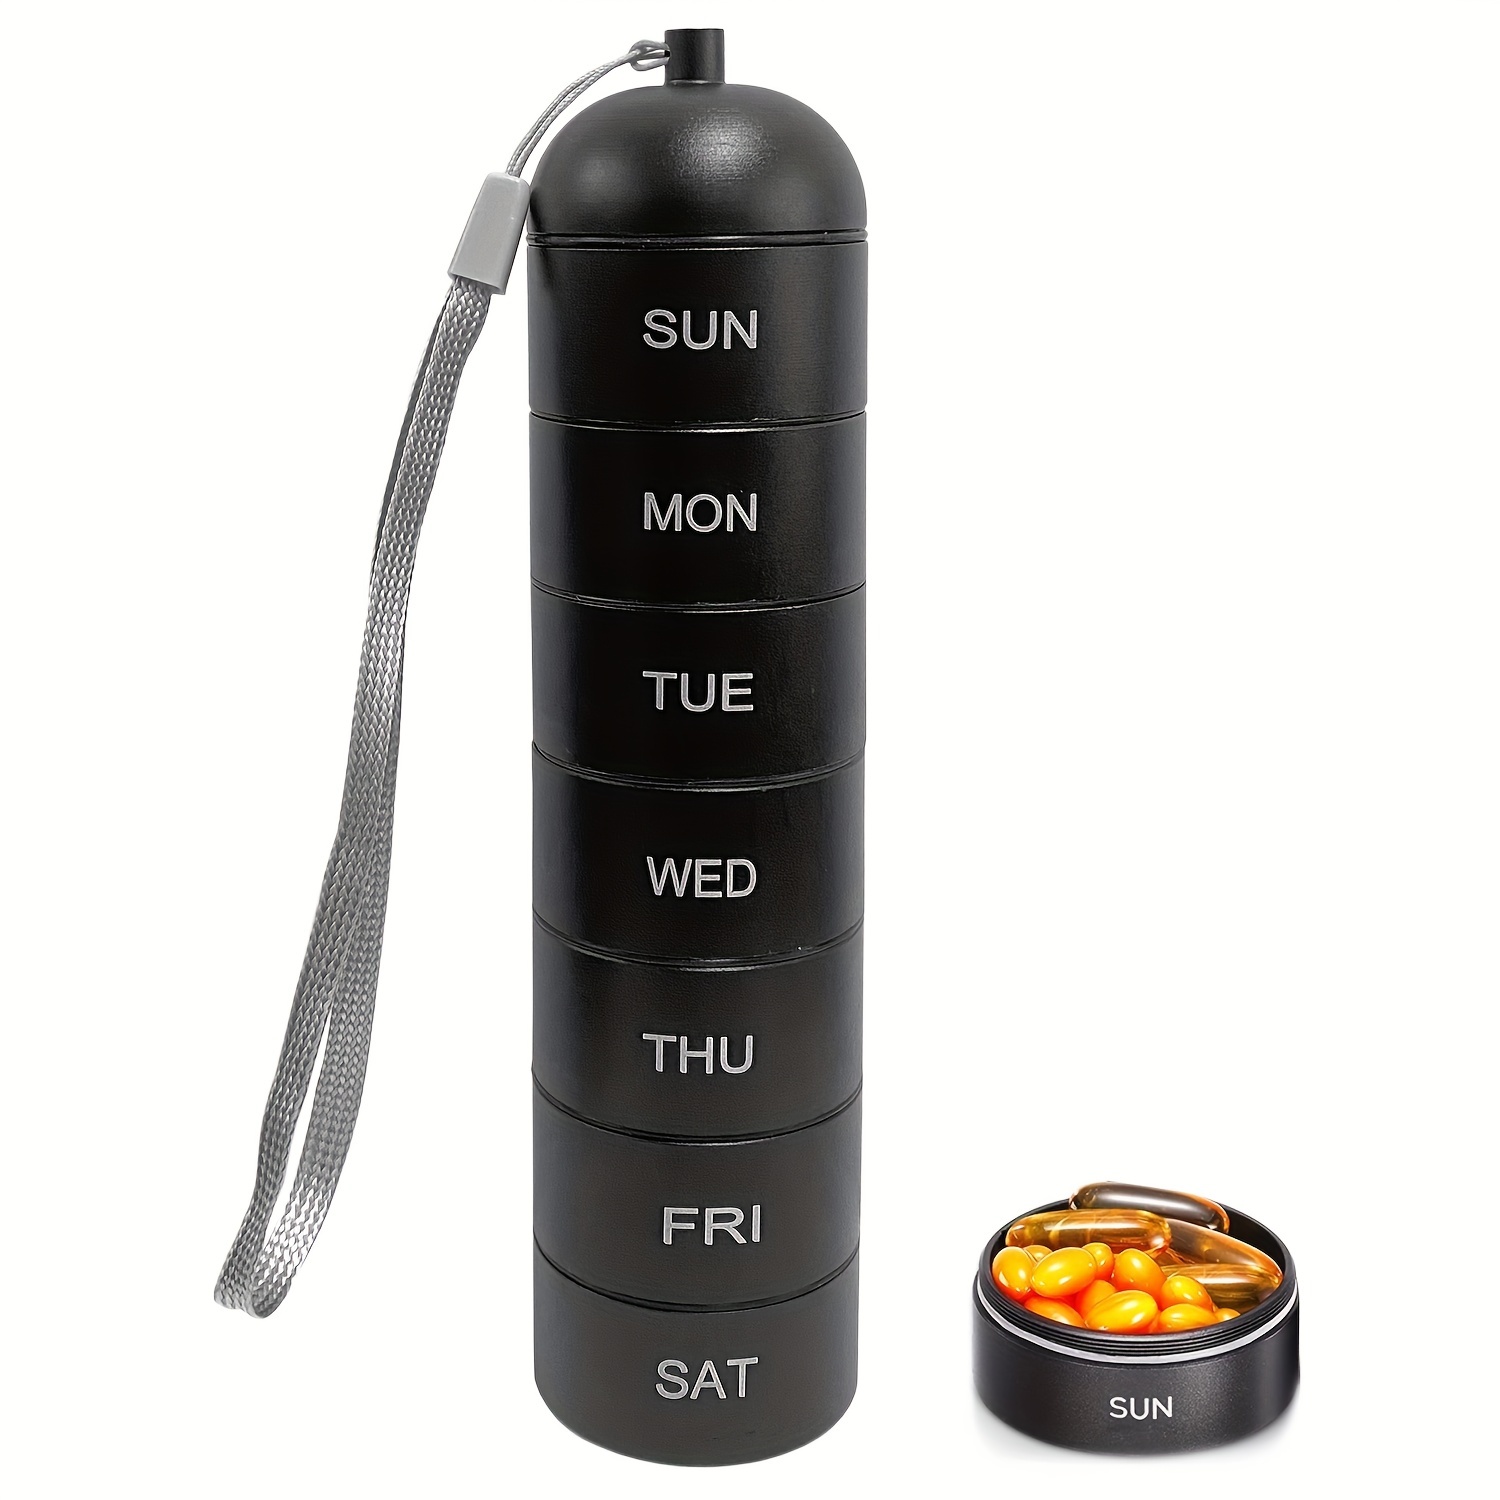 7-day Waterproof Metal Pill Organizer: Stackable, Bpa-free, And